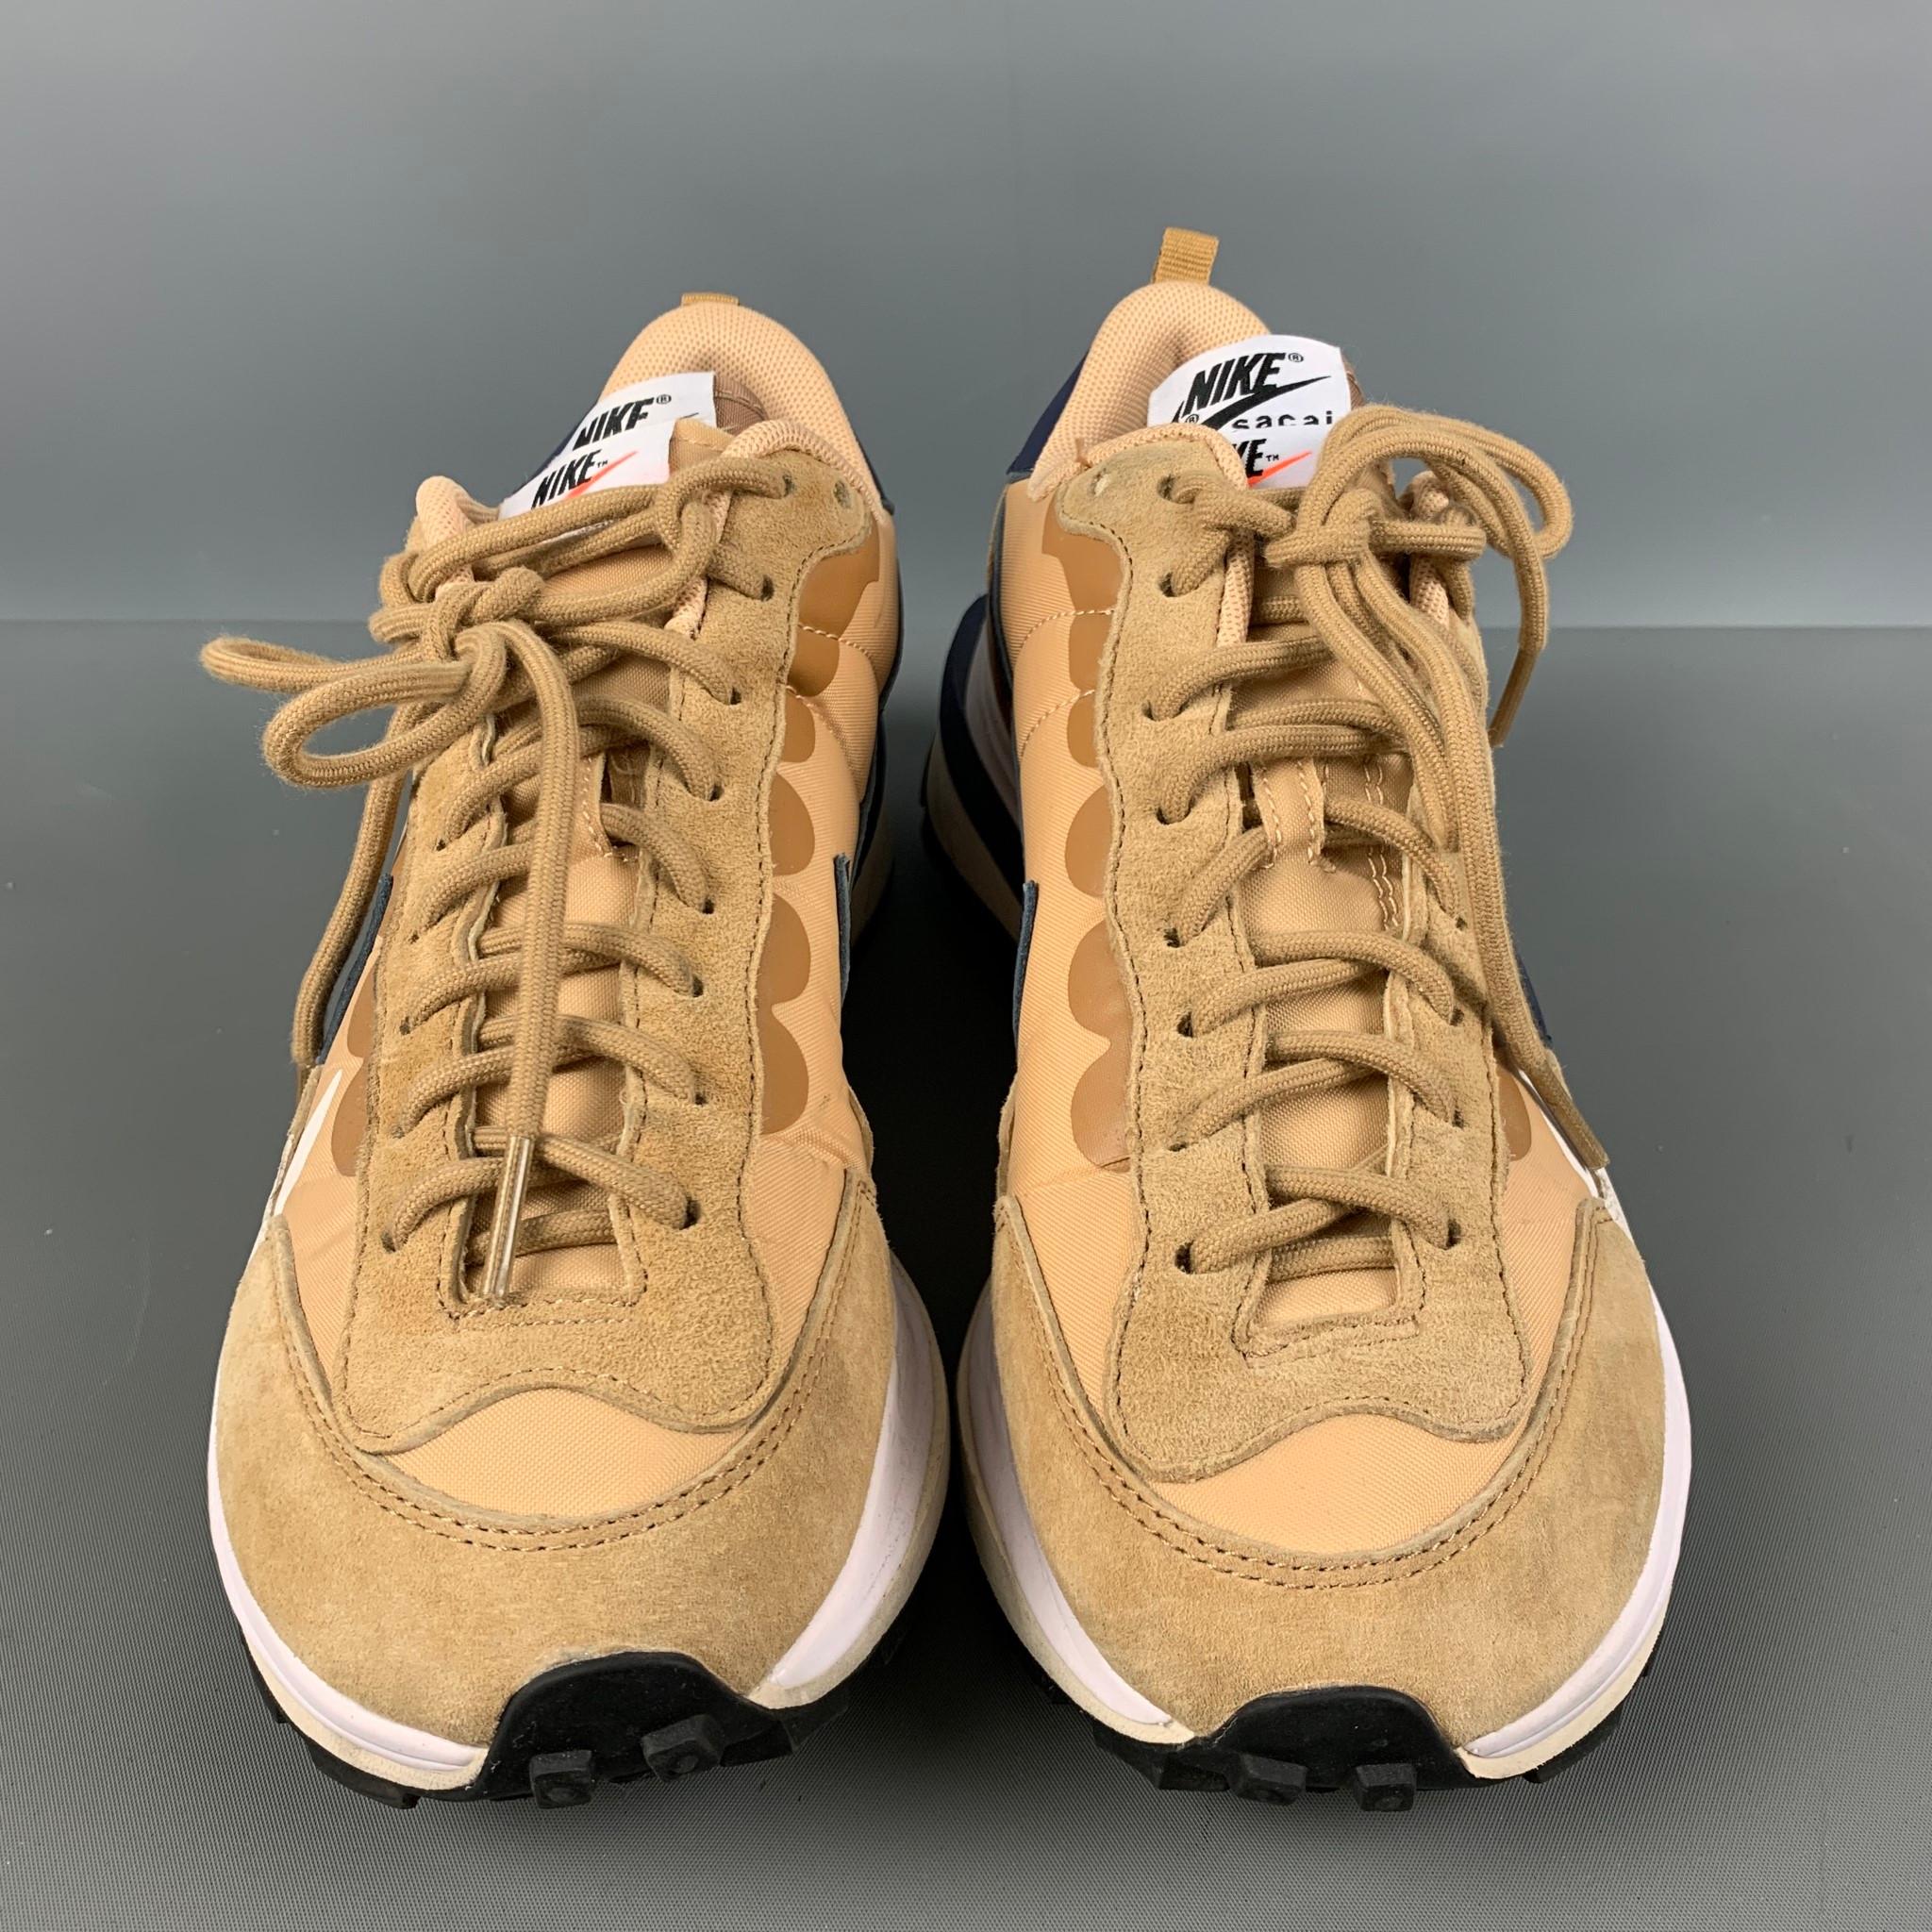 NIKE x SACAI Size 7.5 Tan Navy Mixed Materials Suede Runner Sneakers 2